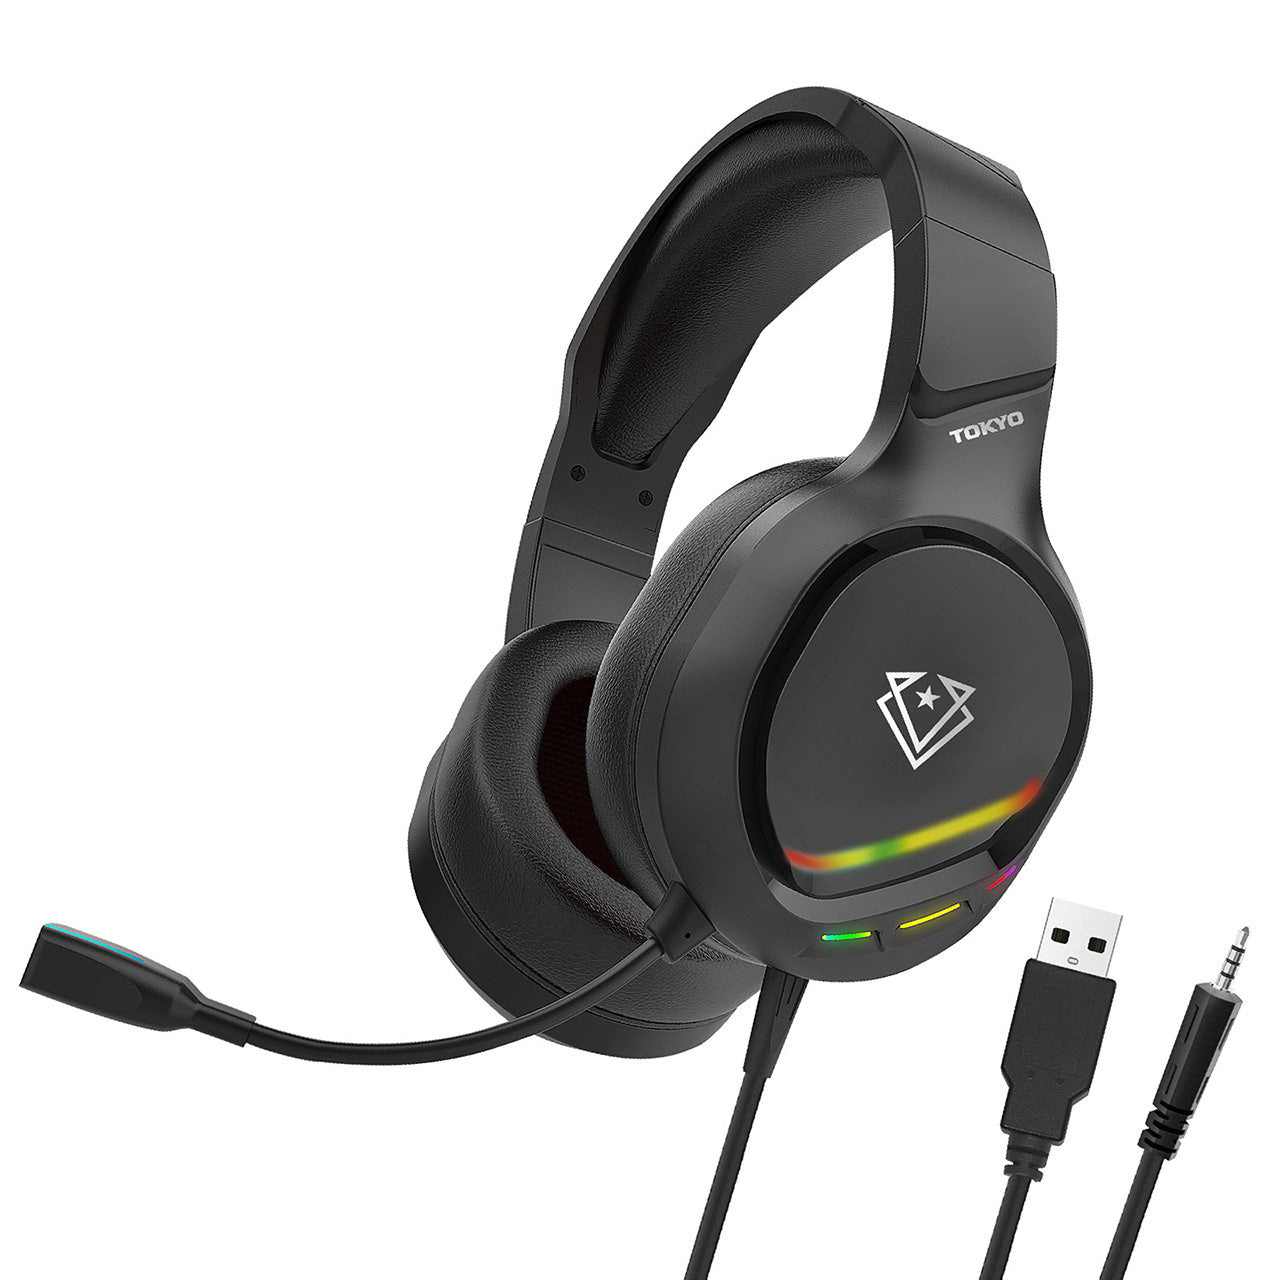 Vertux Tokyo Noise Isolating Amplified Wired Gaming Headset (Black)